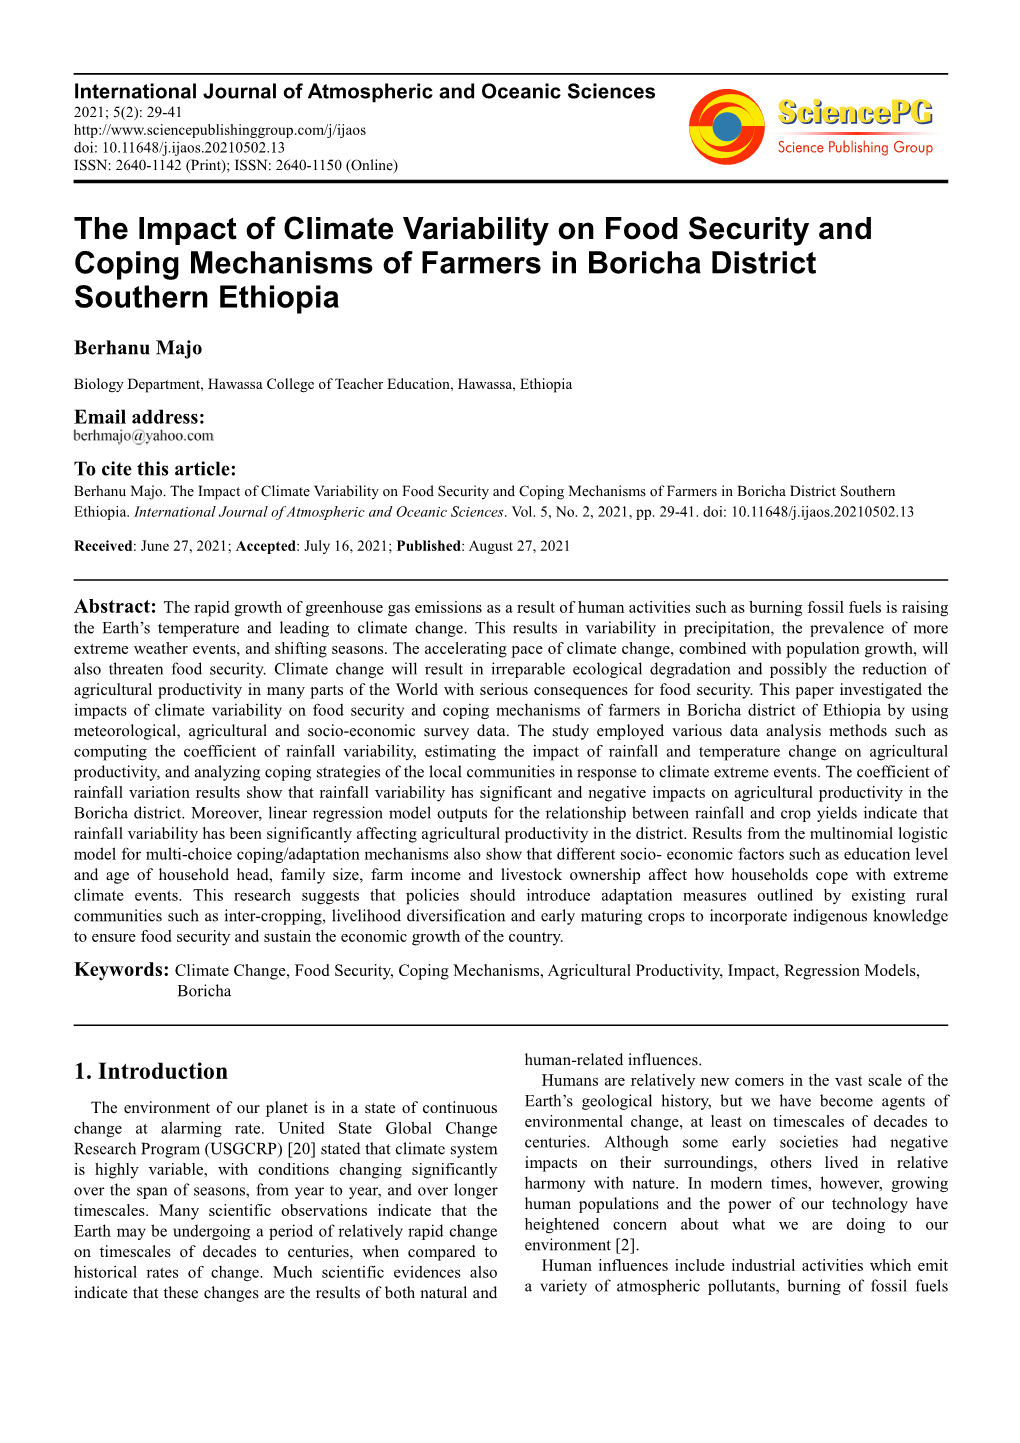 The Impact of Climate Variability on Food Security and Coping Mechanisms of Farmers in Boricha District Southern Ethiopia